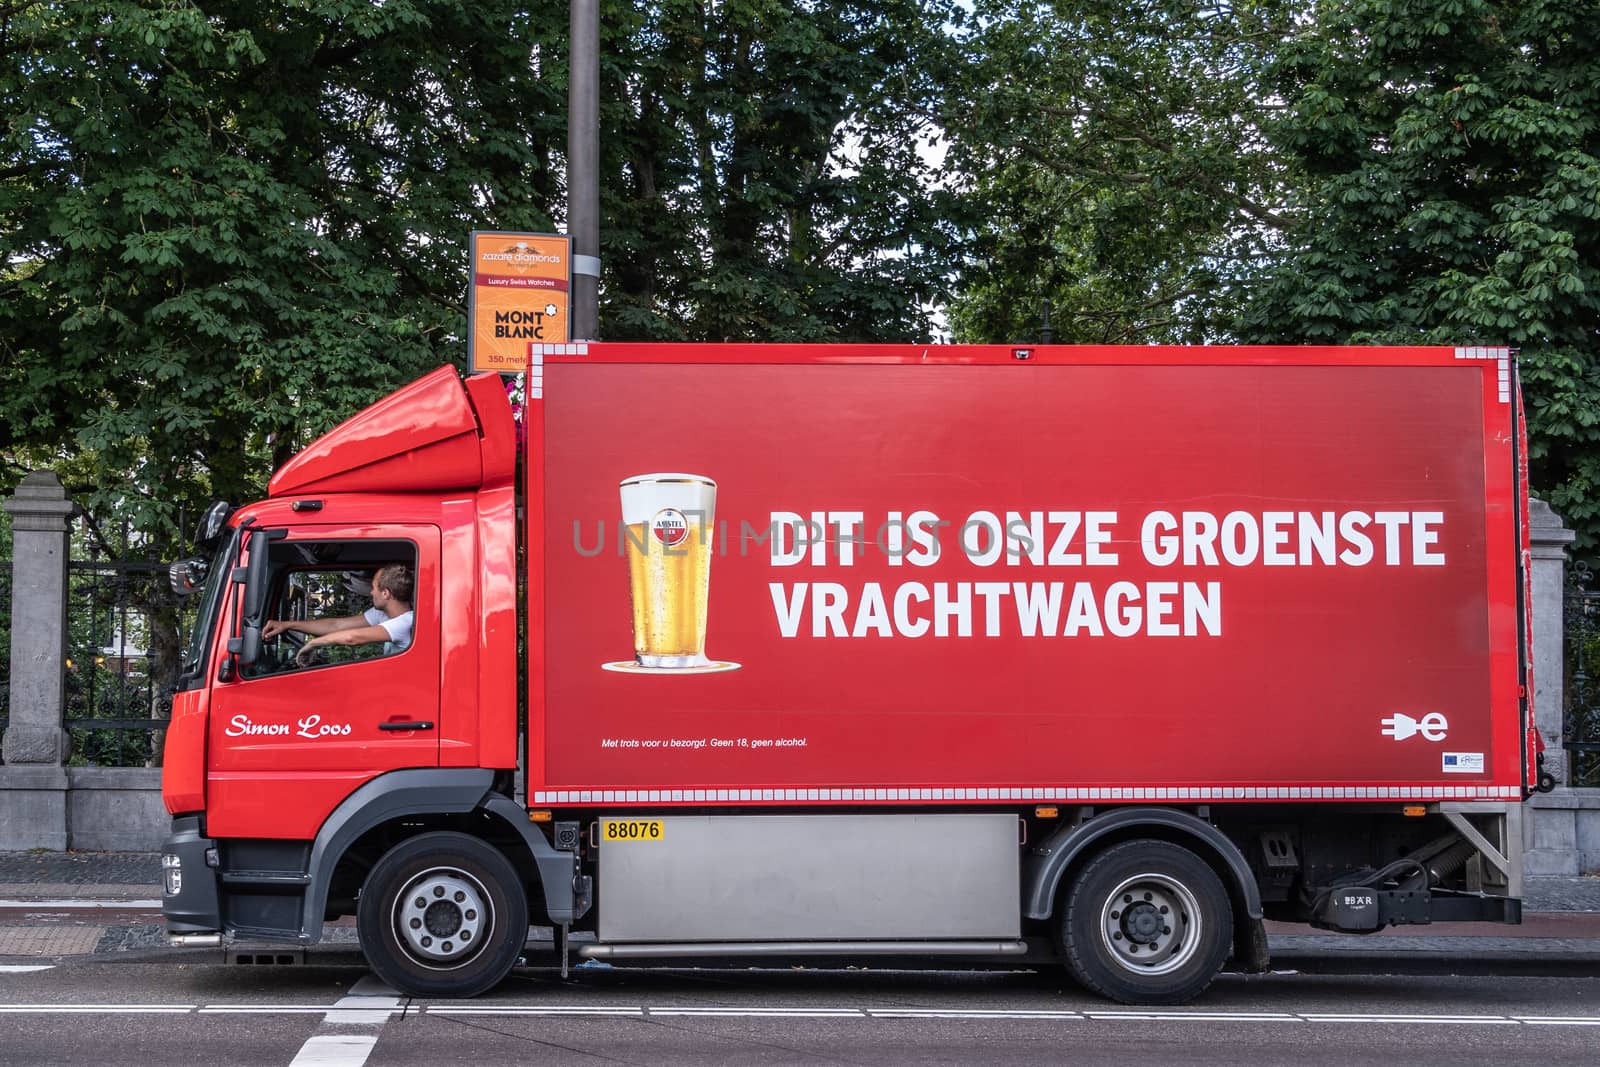 Red Amstel Beer delivery truck in Amsterdam Netherlands. by Claudine